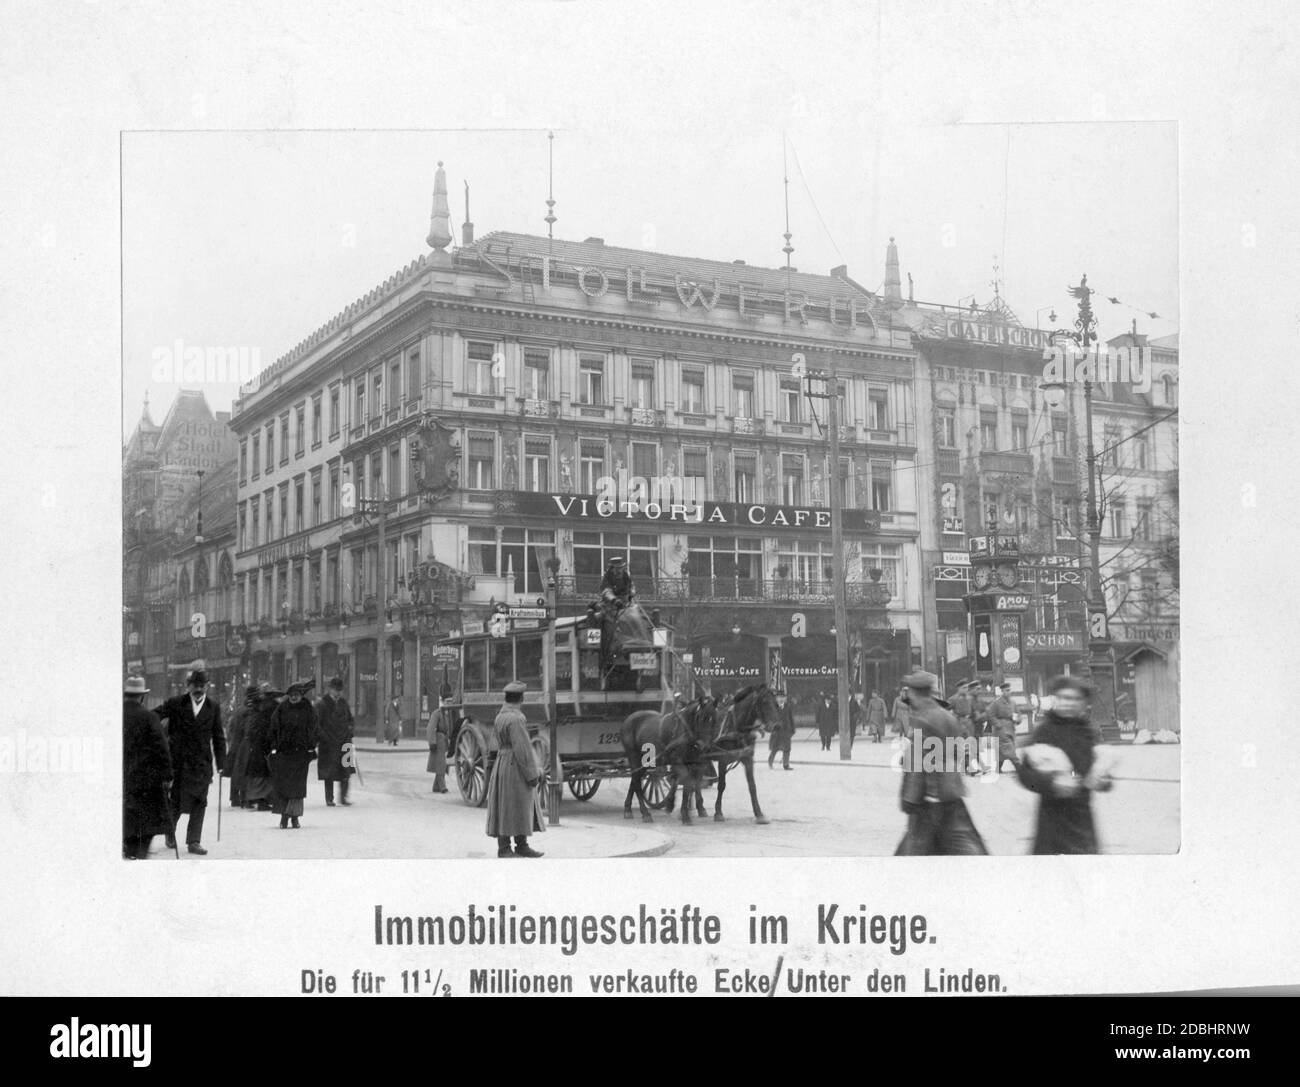 'The Hotel Victoria on the street Unter den Linden, at the corner of Friedrichstrasse in Berlin, changed owners in 1916. The hotel housed the Victoria-Cafe, and next to it the Cafe Schoen. On the roof of the hotel there is an advertisement for ''Stollwerck'' ( chocolate brand). Down on the street a carriage stops at a motor bus stop.' Stock Photo